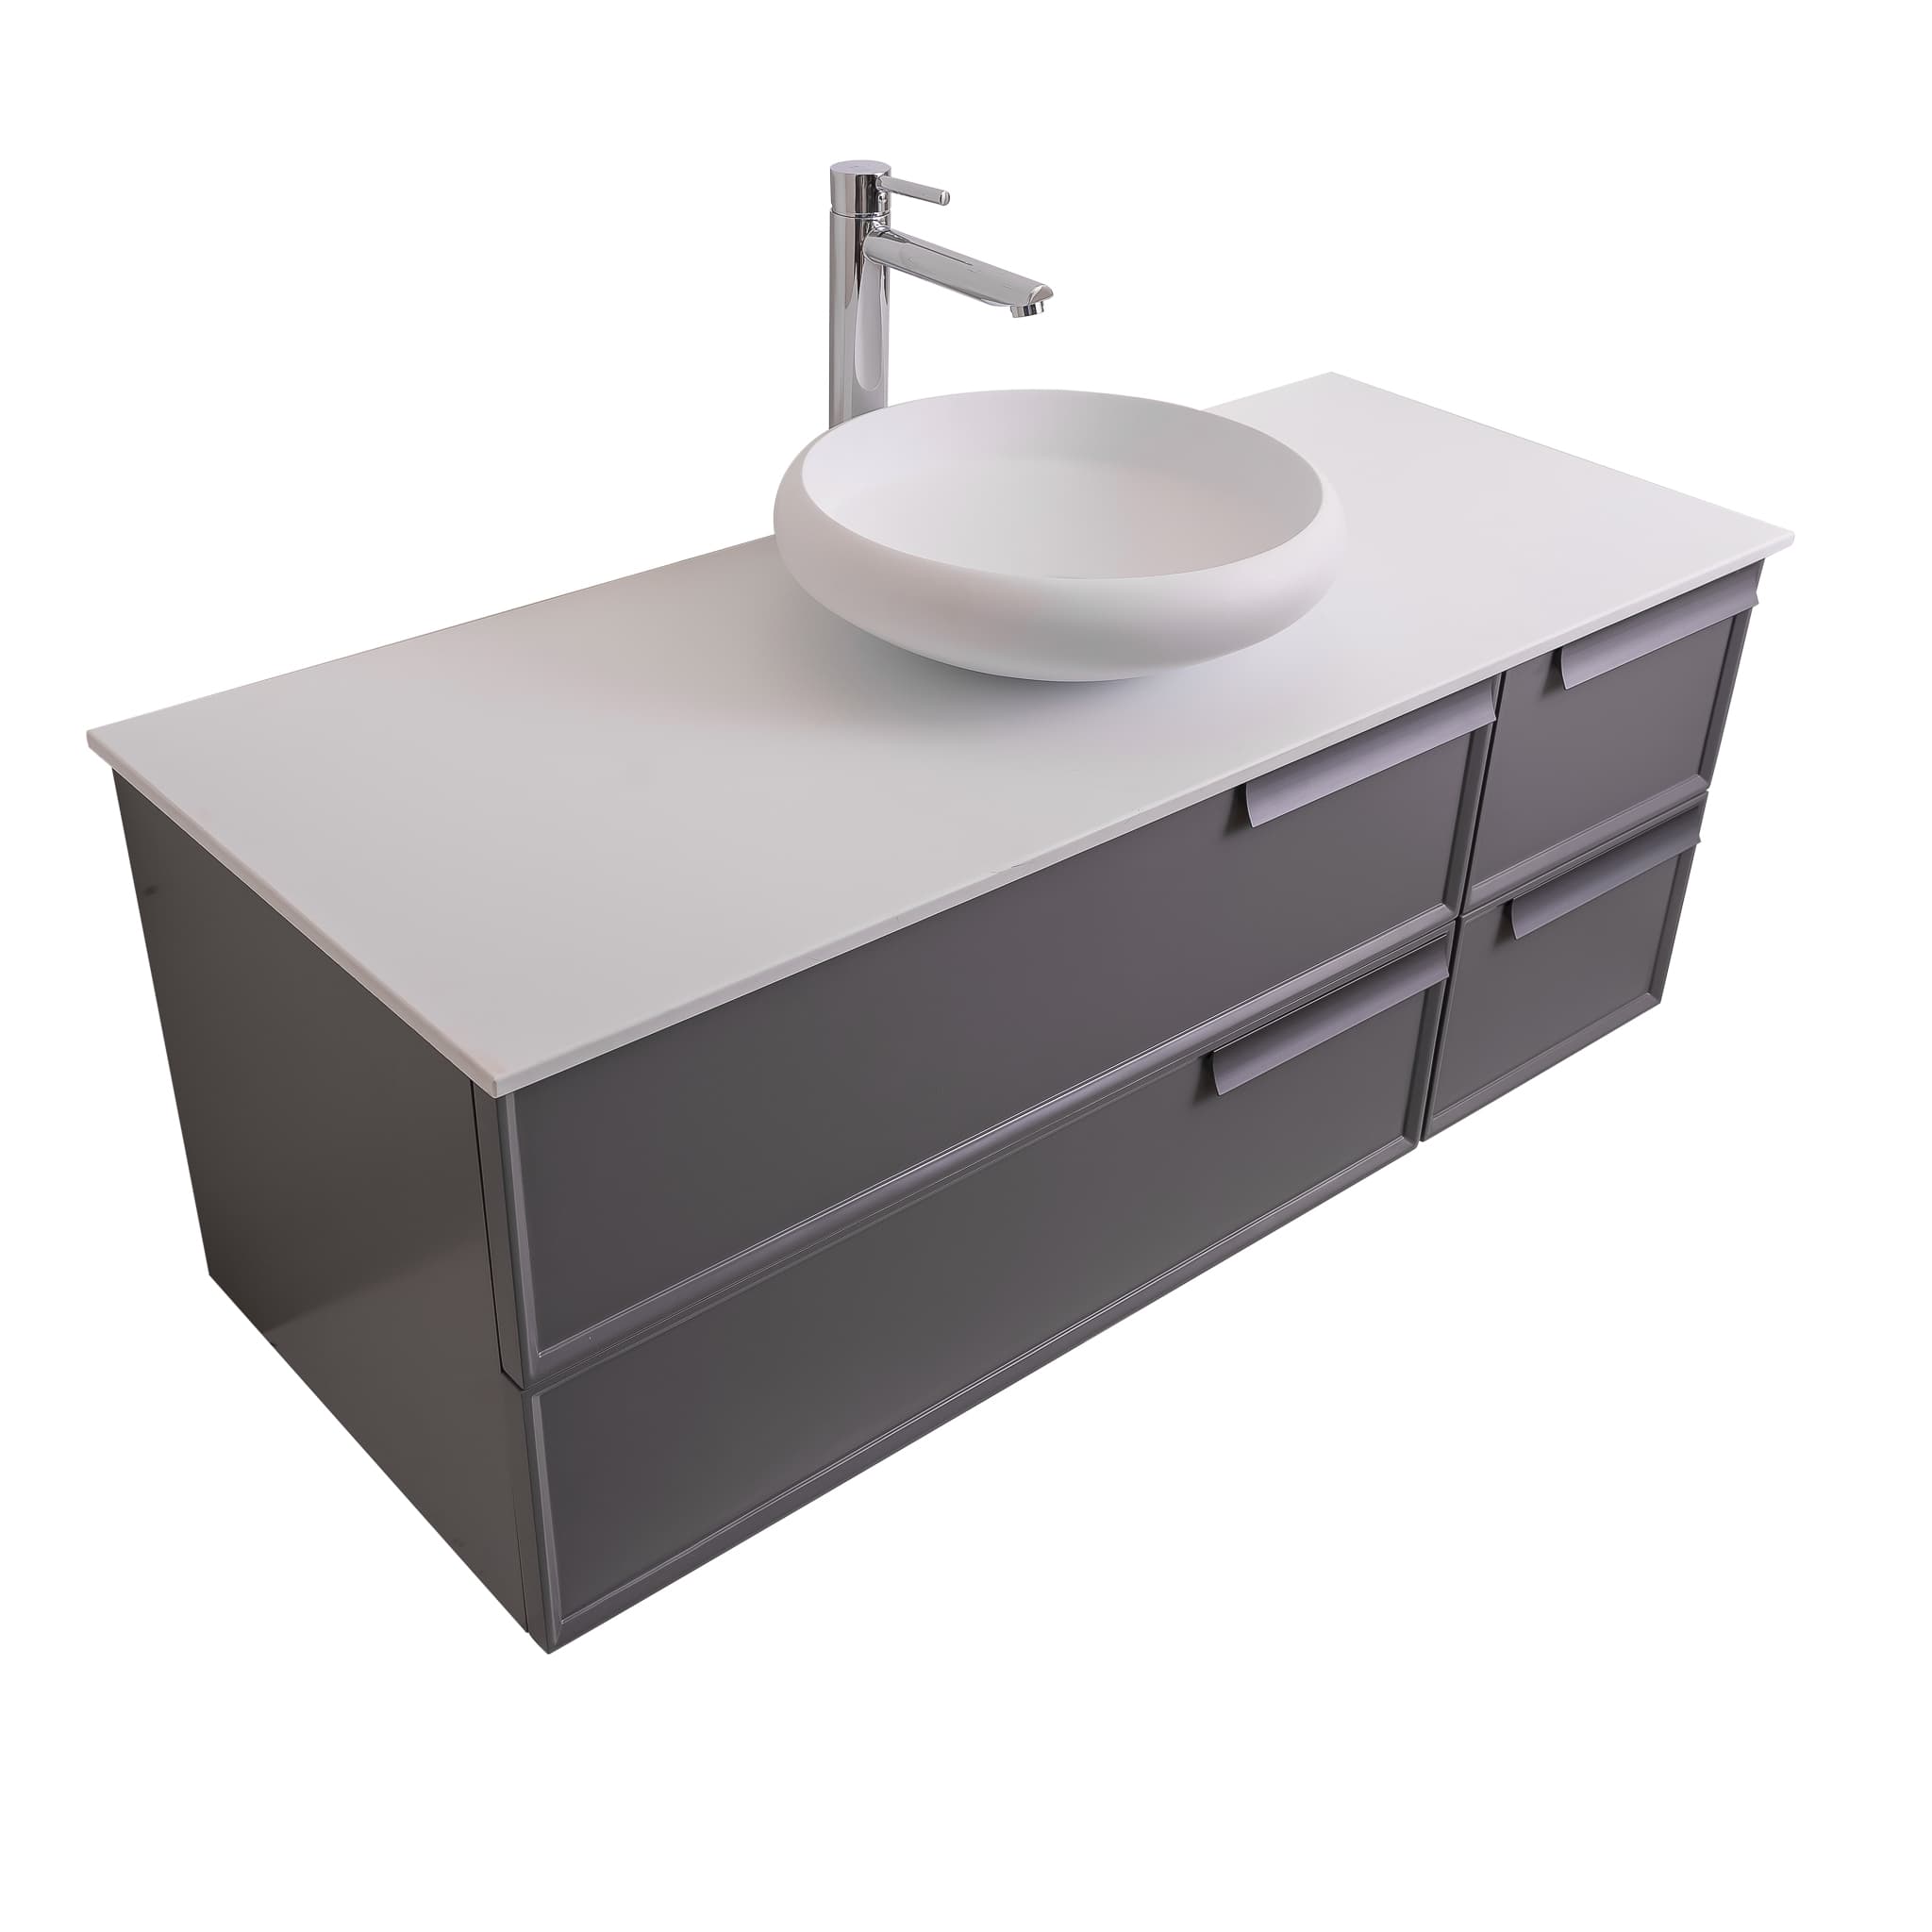 Garda 47.5 Matte Grey Cabinet, Solid Surface Flat White Counter and Round Solid Surface White Basin 1153, Wall Mounted Modern Vanity Set